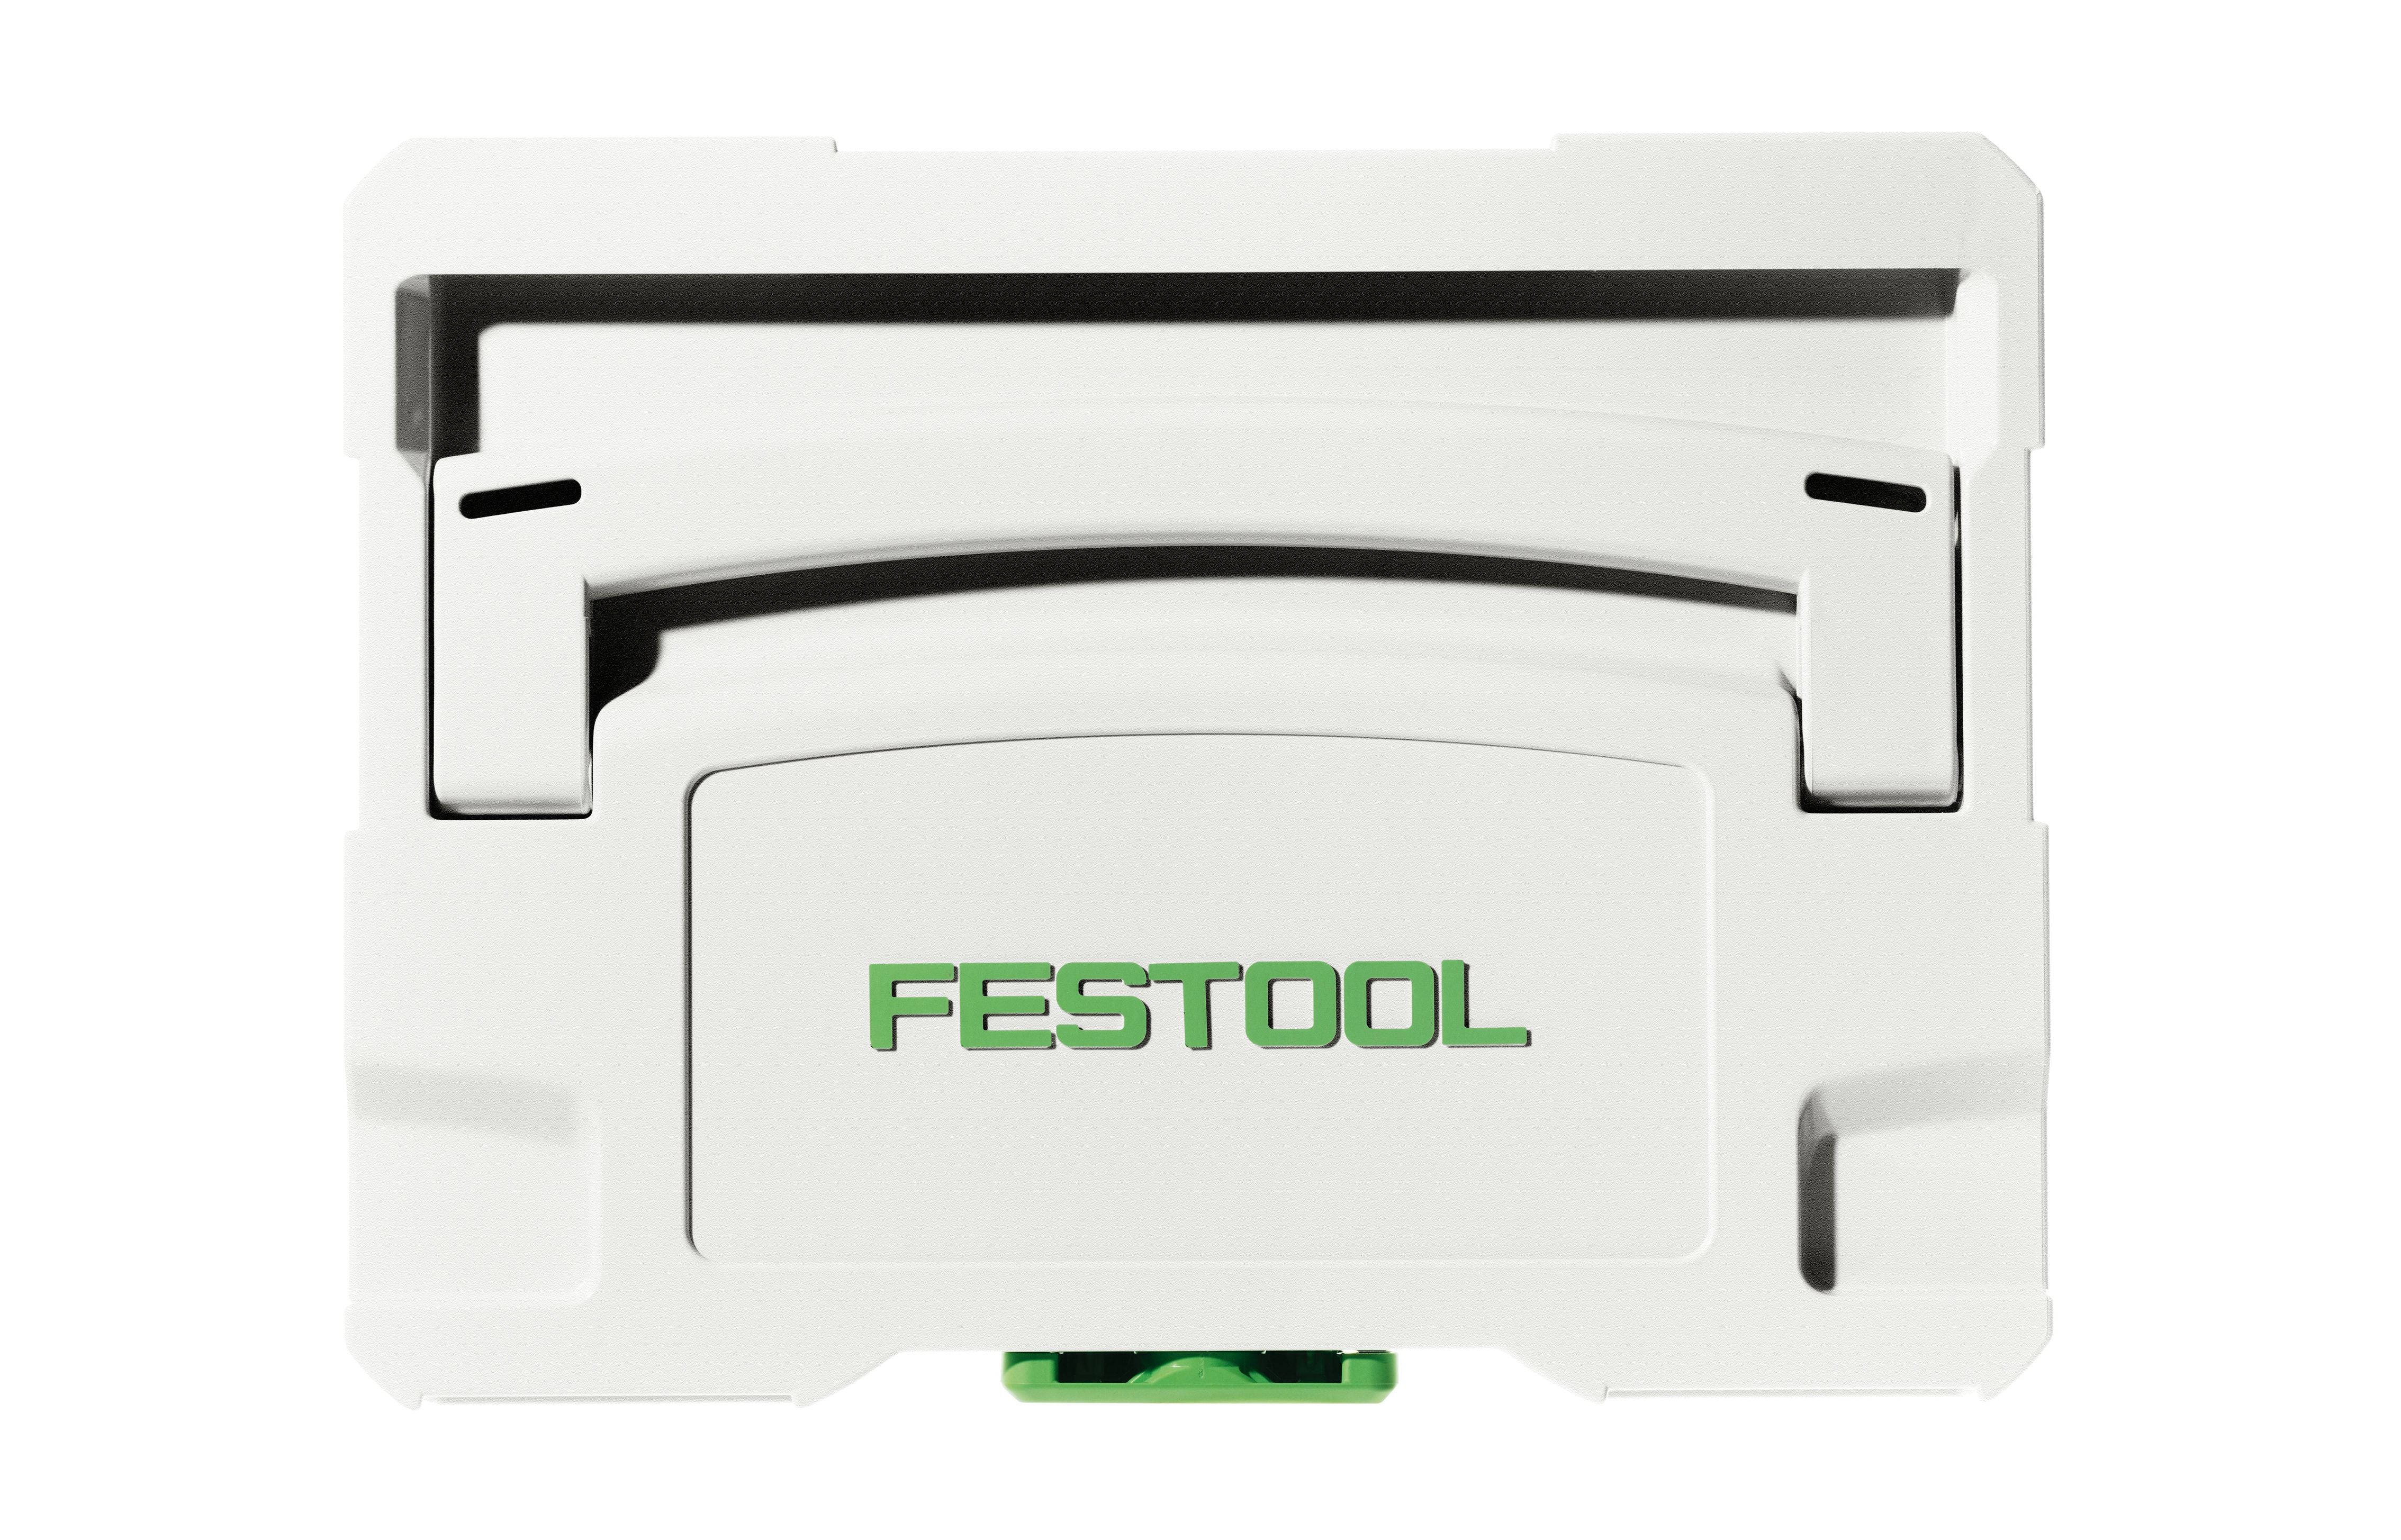 T-LOC Systainer SYS 3 Storage Box 10521417 by Festool